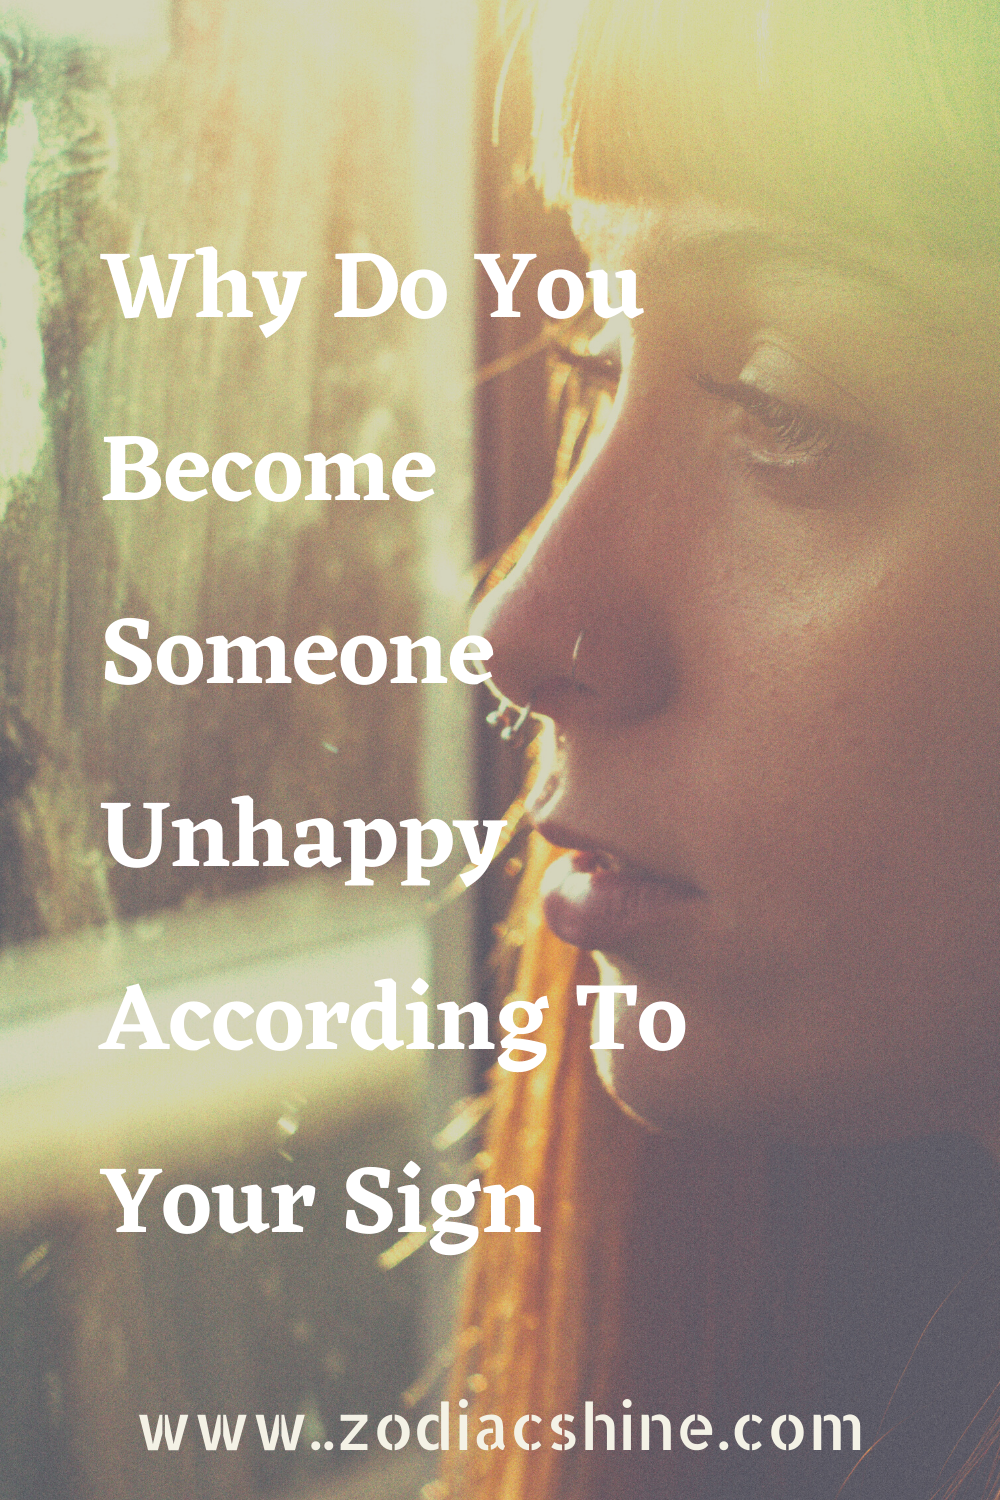 Why Do You Become Someone Unhappy According To Your Sign